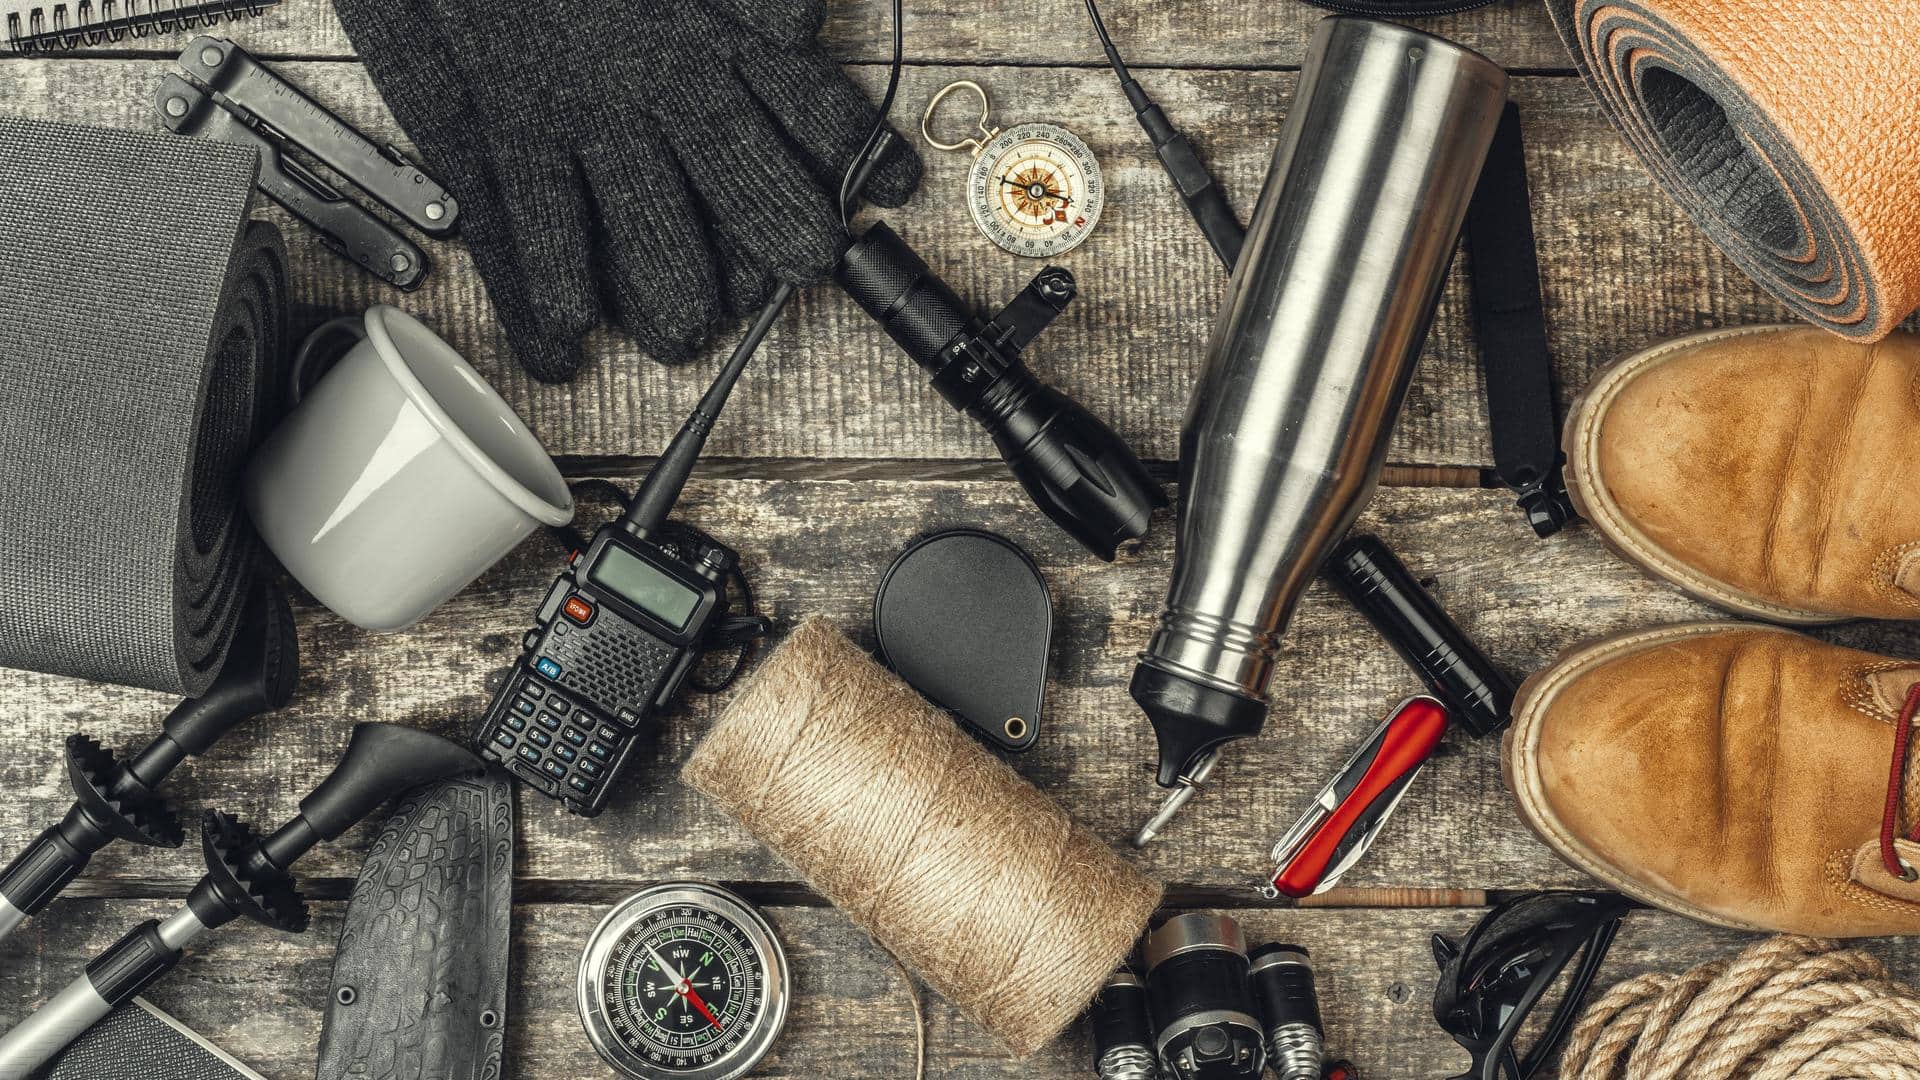 Key things to pack for a high-altitude trek